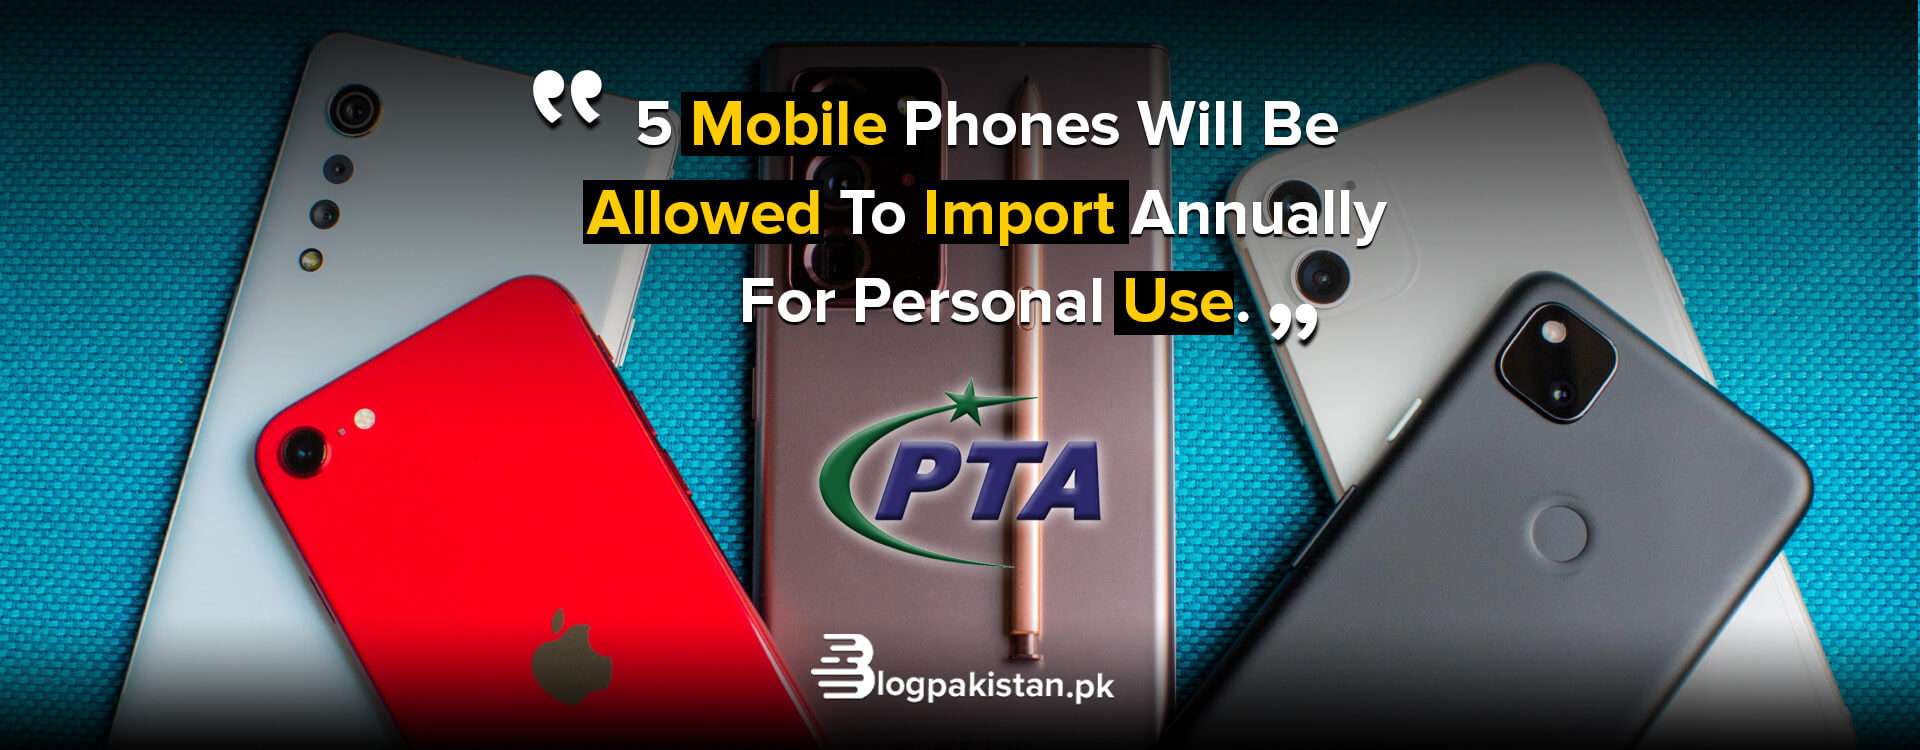 New Policy by PTA: 5 Mobile Phones Allowed for Import on Yearly Basis